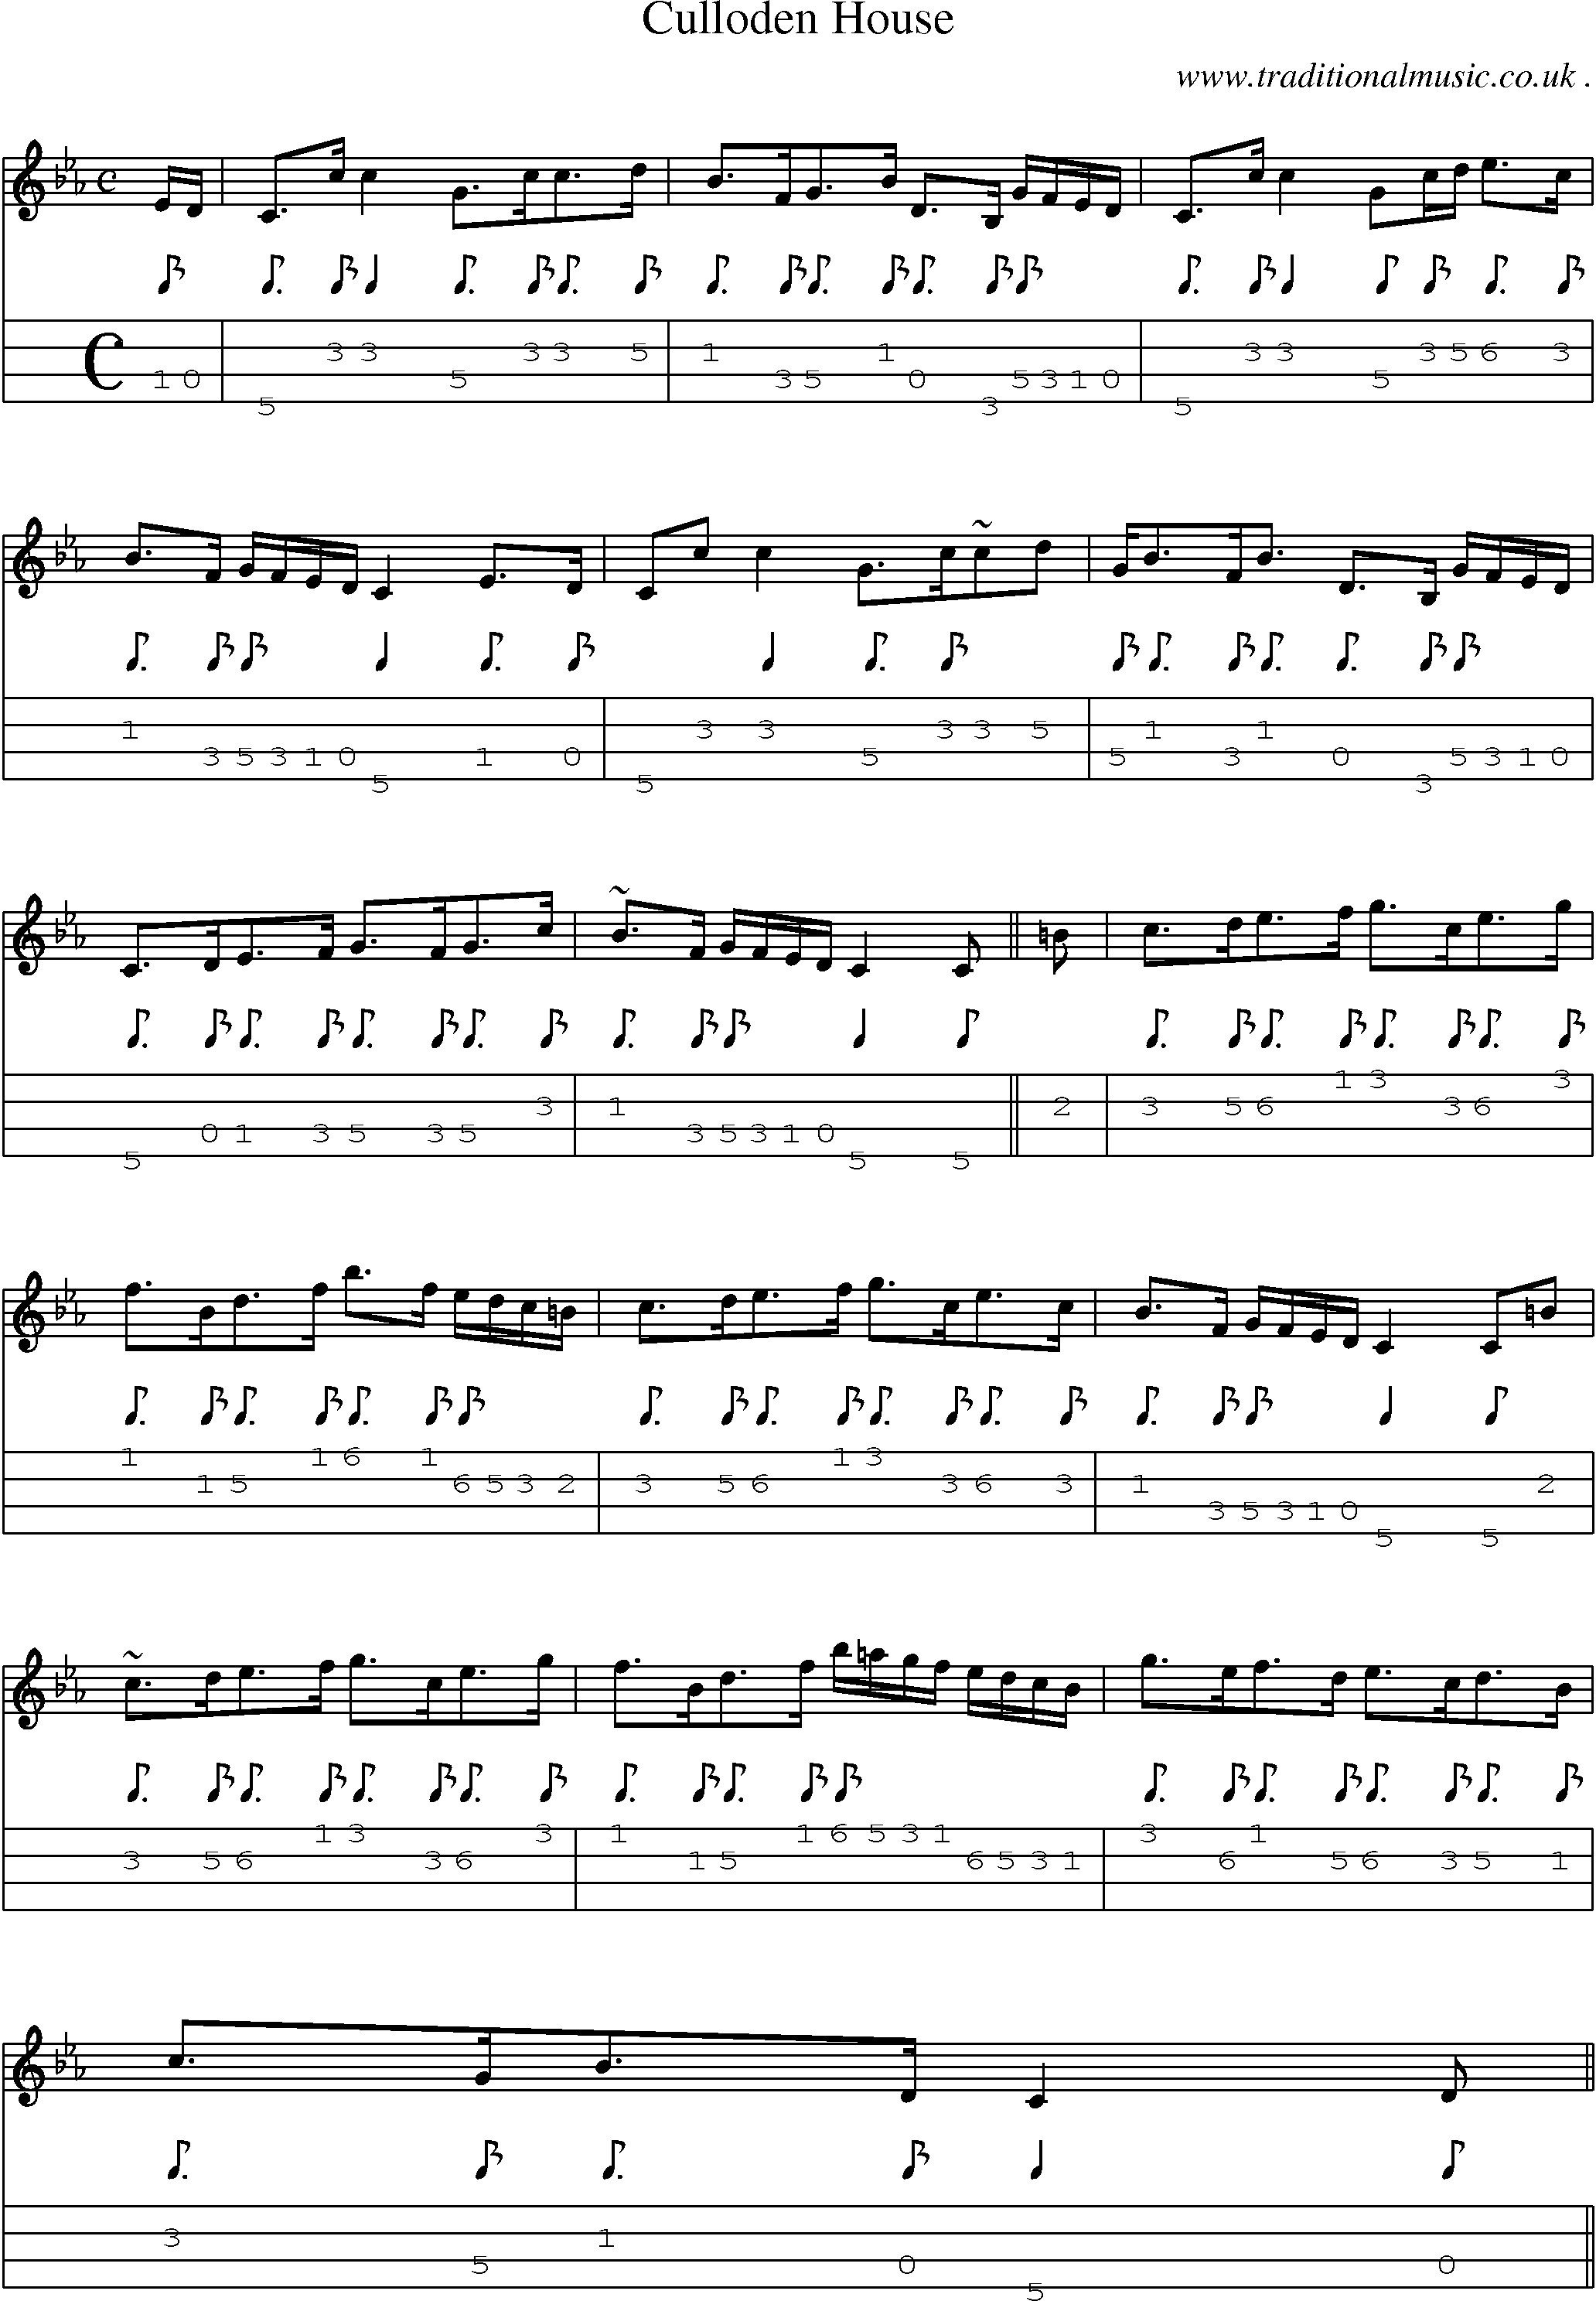 Sheet-music  score, Chords and Mandolin Tabs for Culloden House